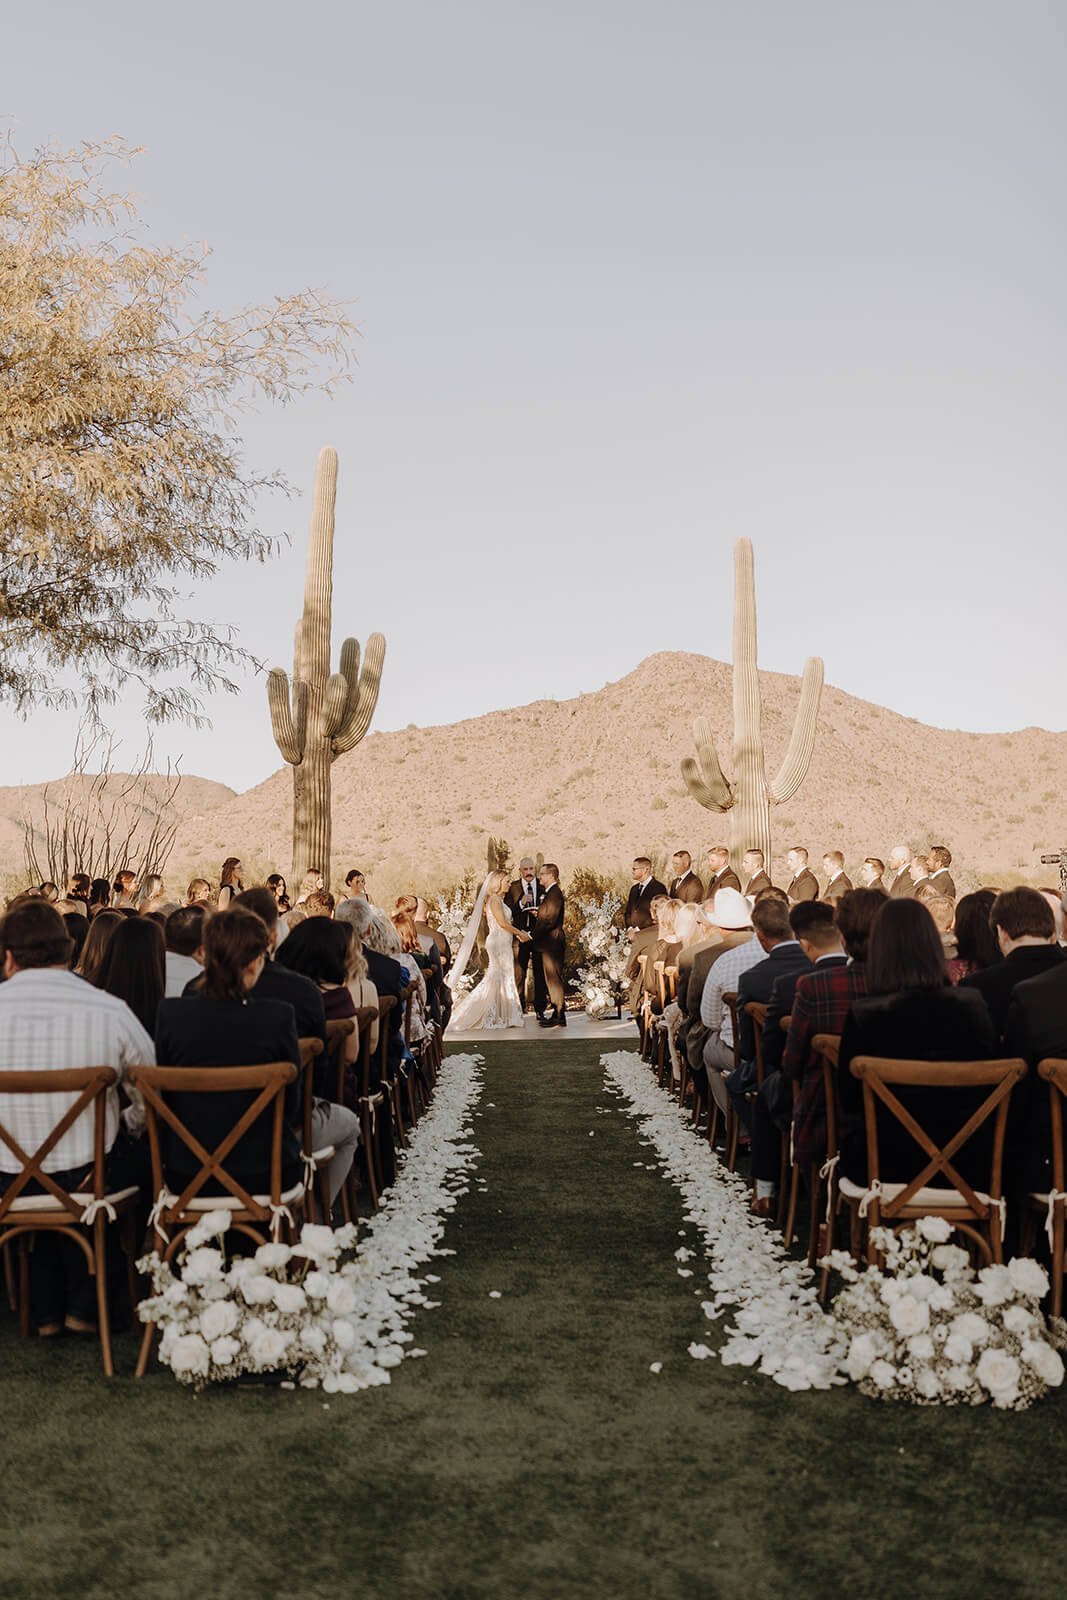 Wedding ceremony at Arizona destination wedding with cactus and mountains in the background